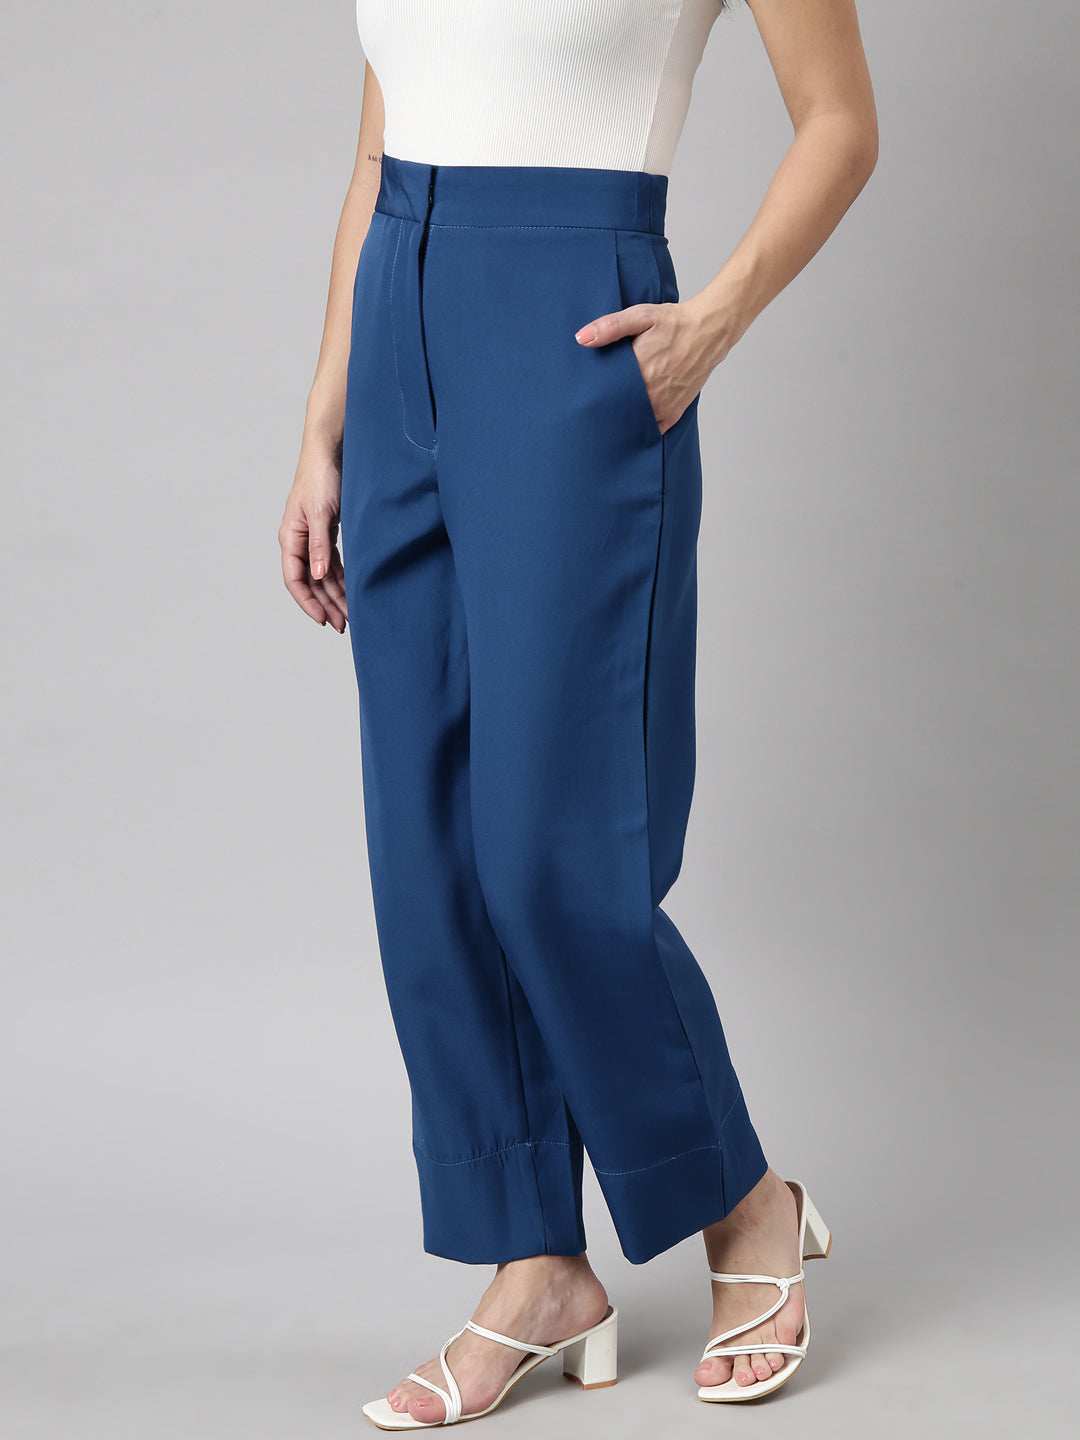 Women Solid Teal Parallel Trousers